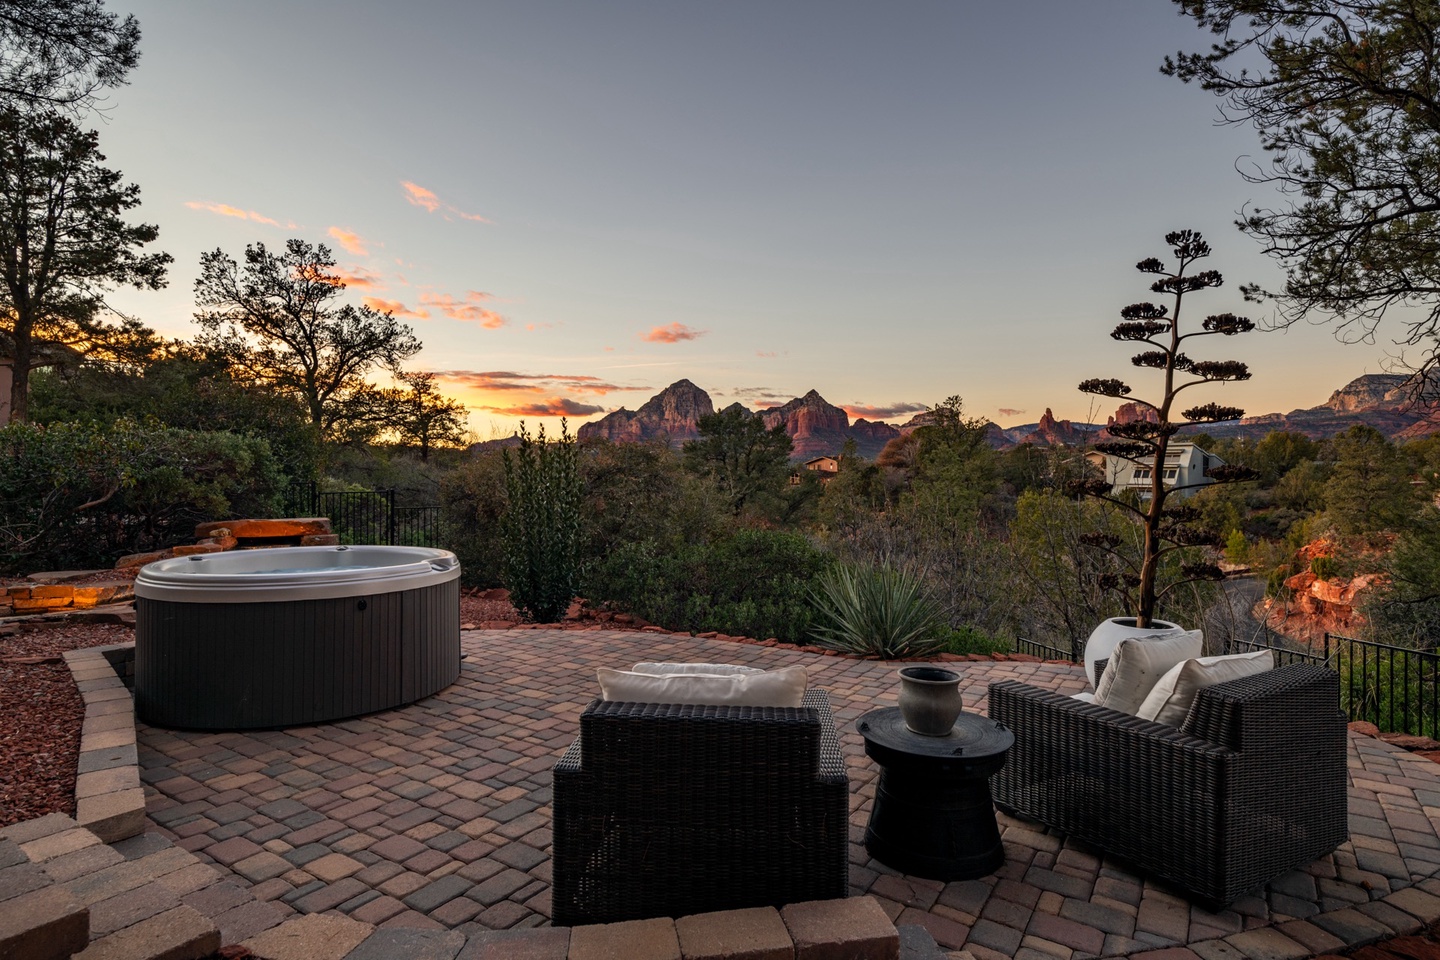 Enjoy a once-in-a-lifetime Sedona sunset